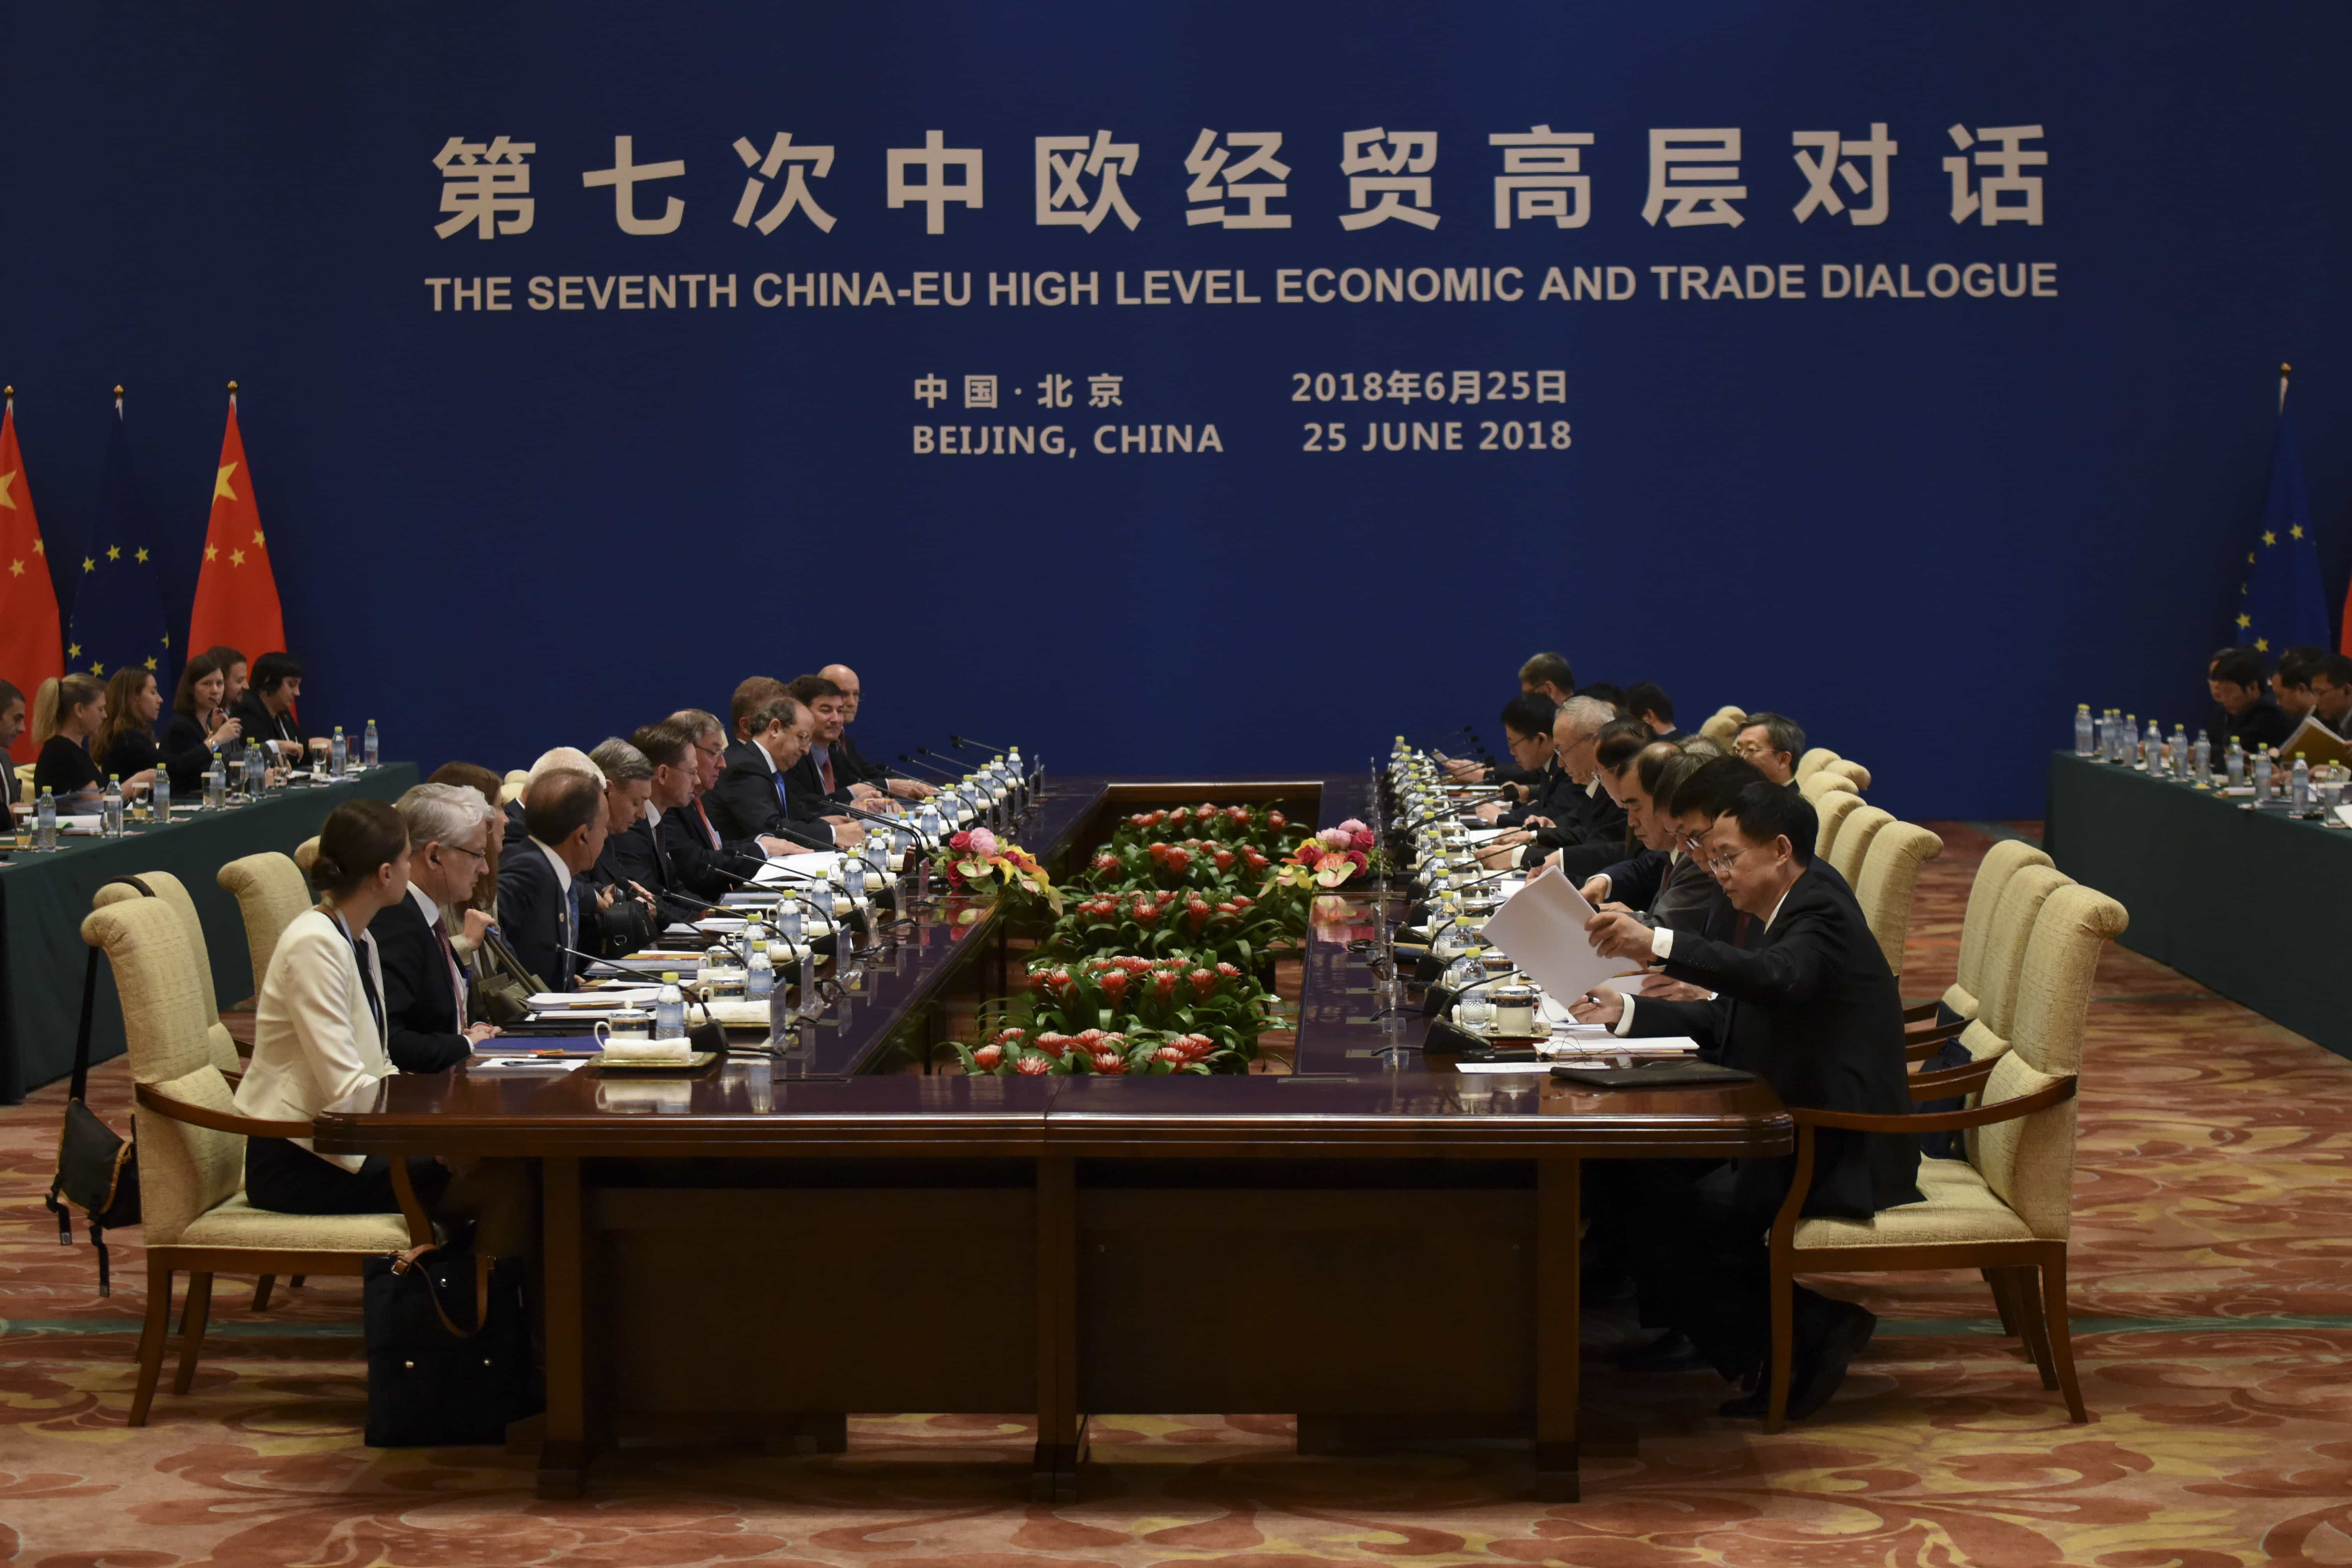 European Commission Vice-President Jyrki Katainen (7th L) speaks to Chinese Vice Premier Liu He (7th R, white hair) at their meeting during the EU-China High-level Economic Dialogue at the Diaoyutai State Guesthouse in Beijing, 25 June 2018, WANG ZHAO/AFP/Getty Images